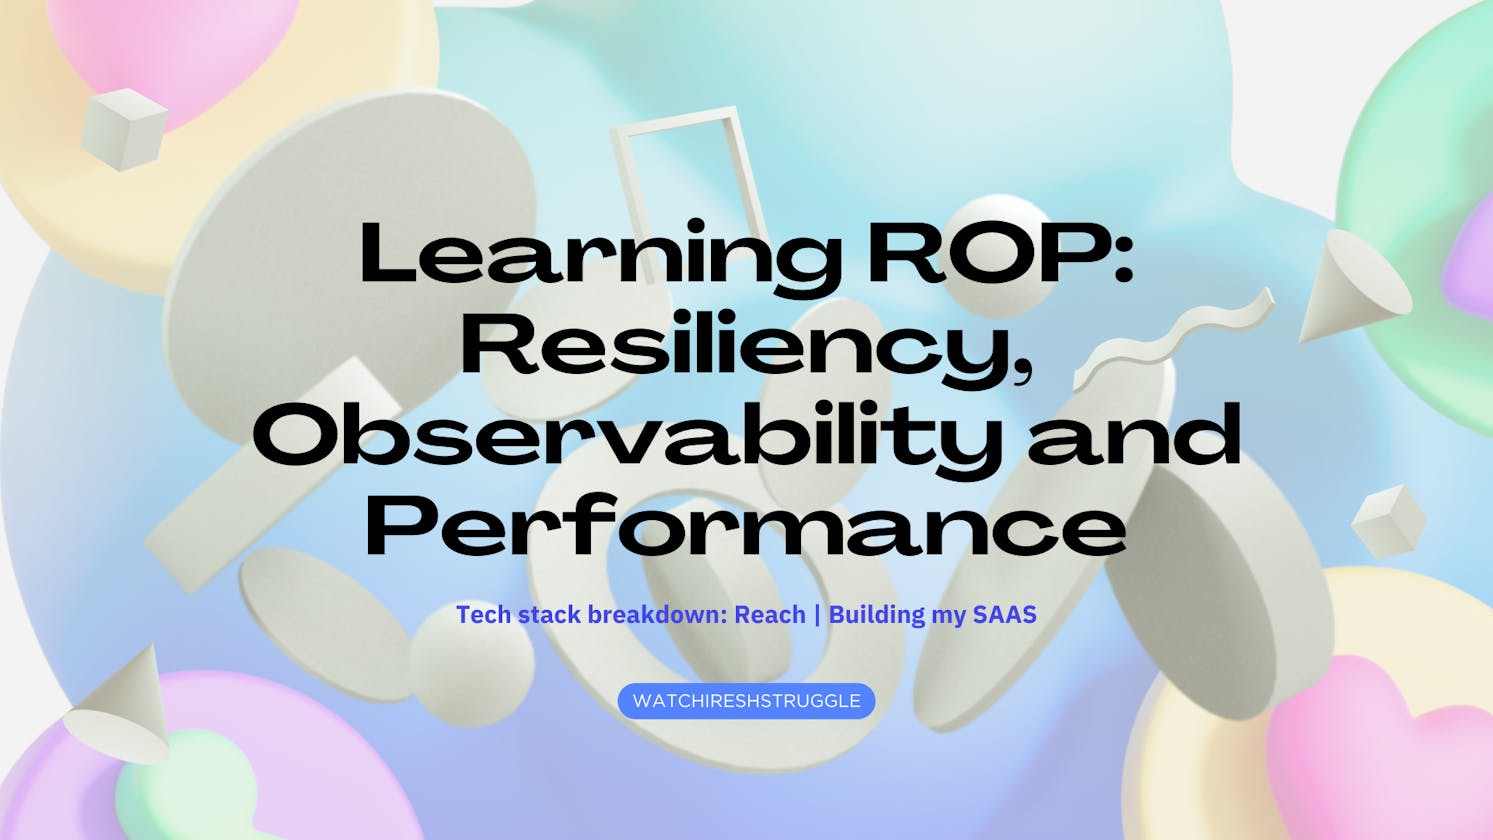 Learning ROP: Resiliency, Observability and Performance